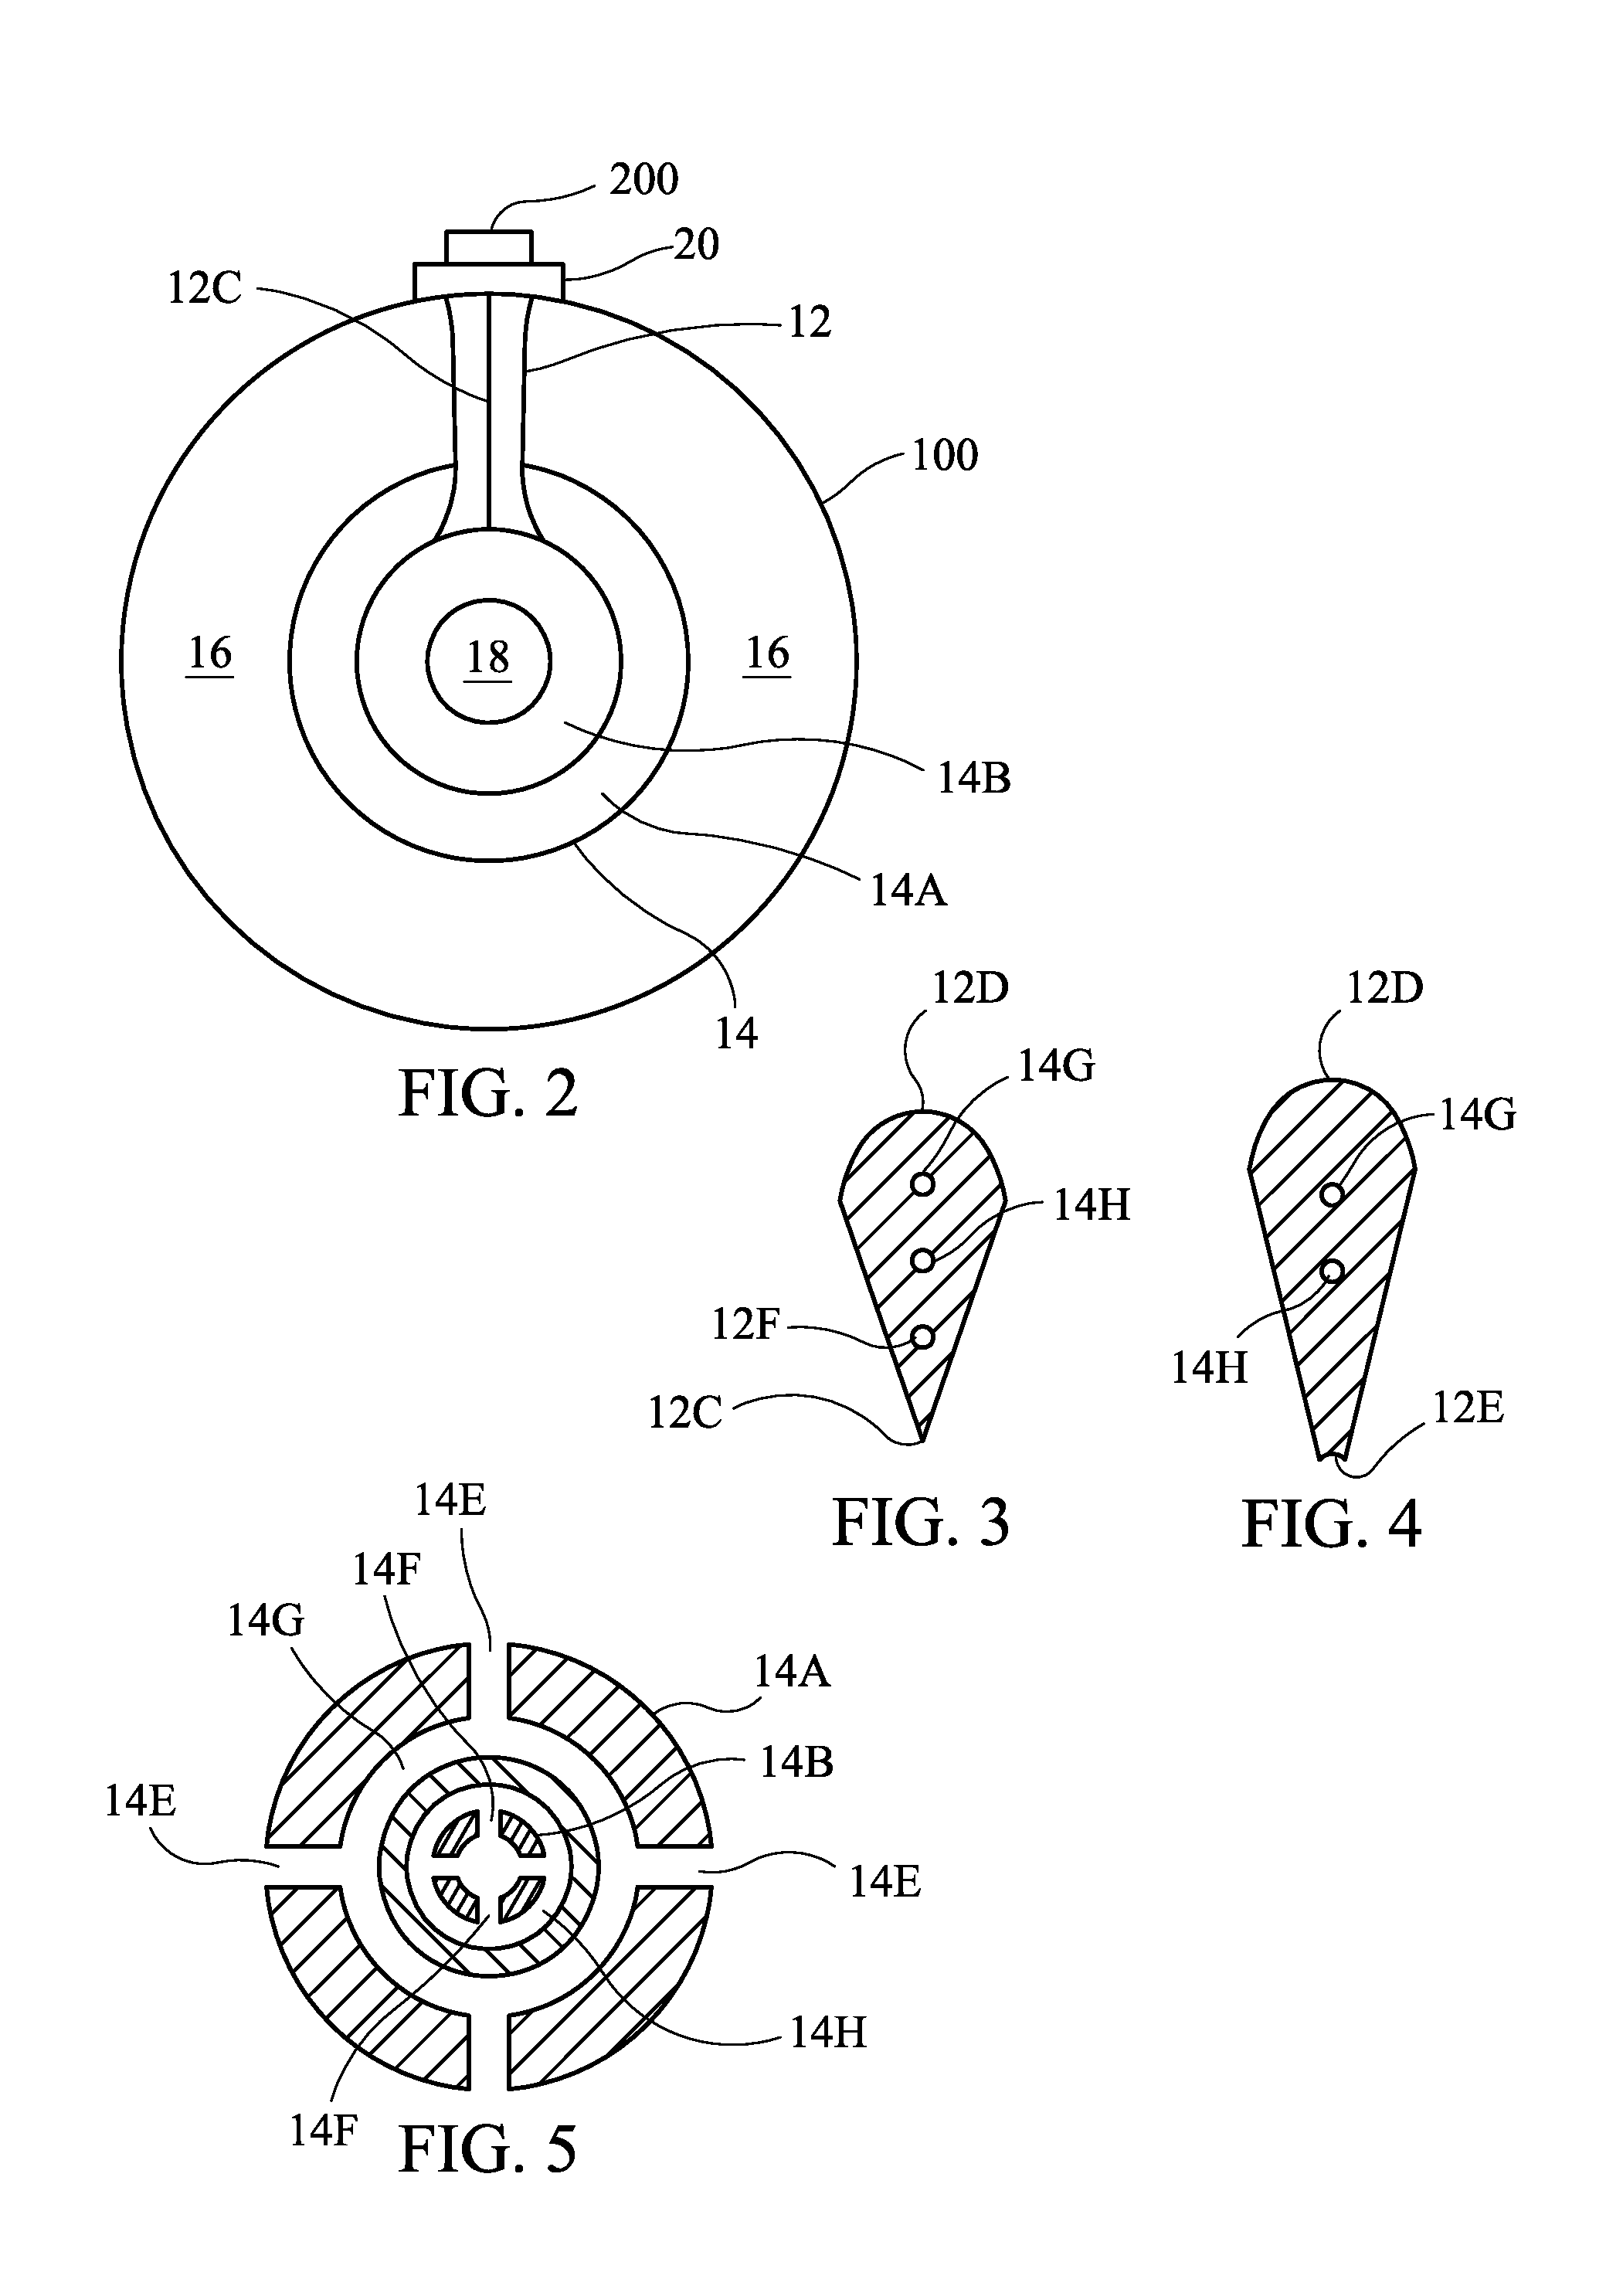 Self-contained tubular compressed-flow generation device for use in making differential measurements